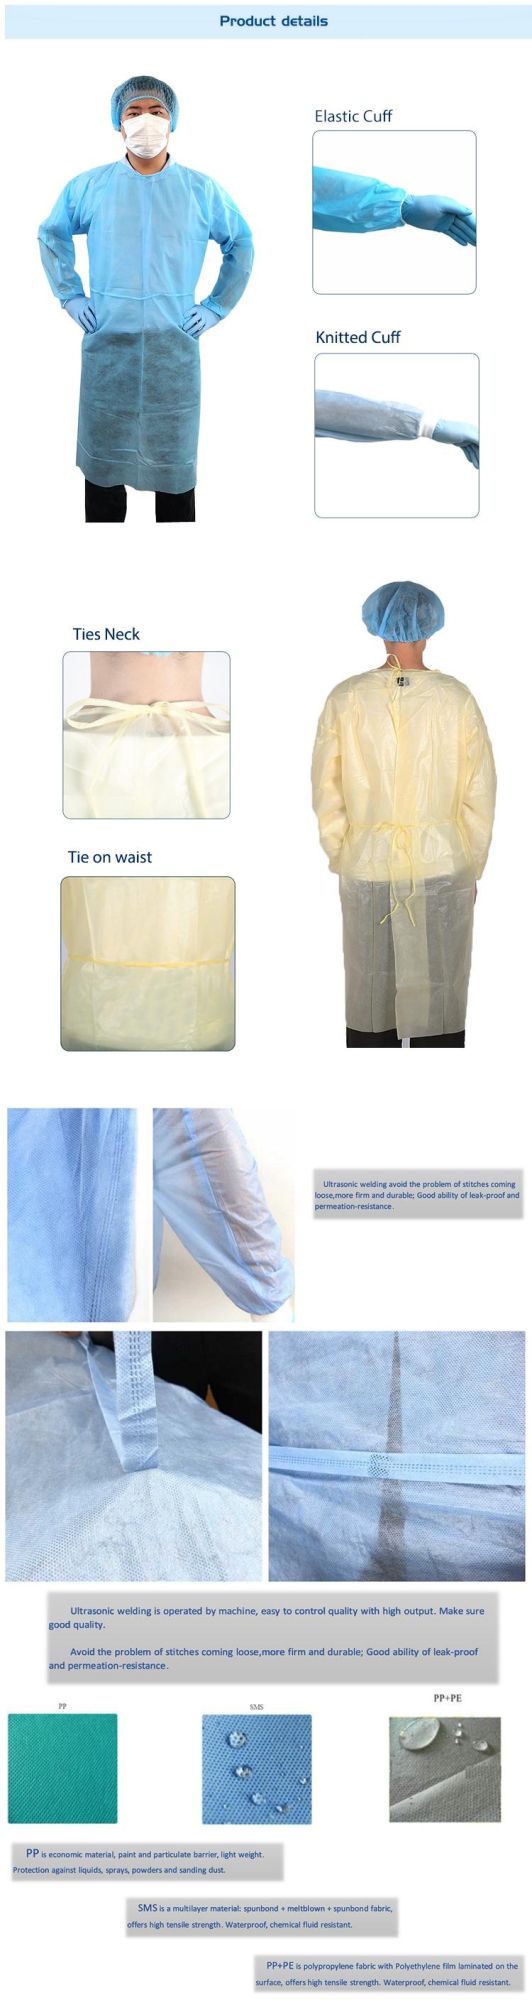 PP Laminated PE Prevention of Liquid Leakage Isolation Gown